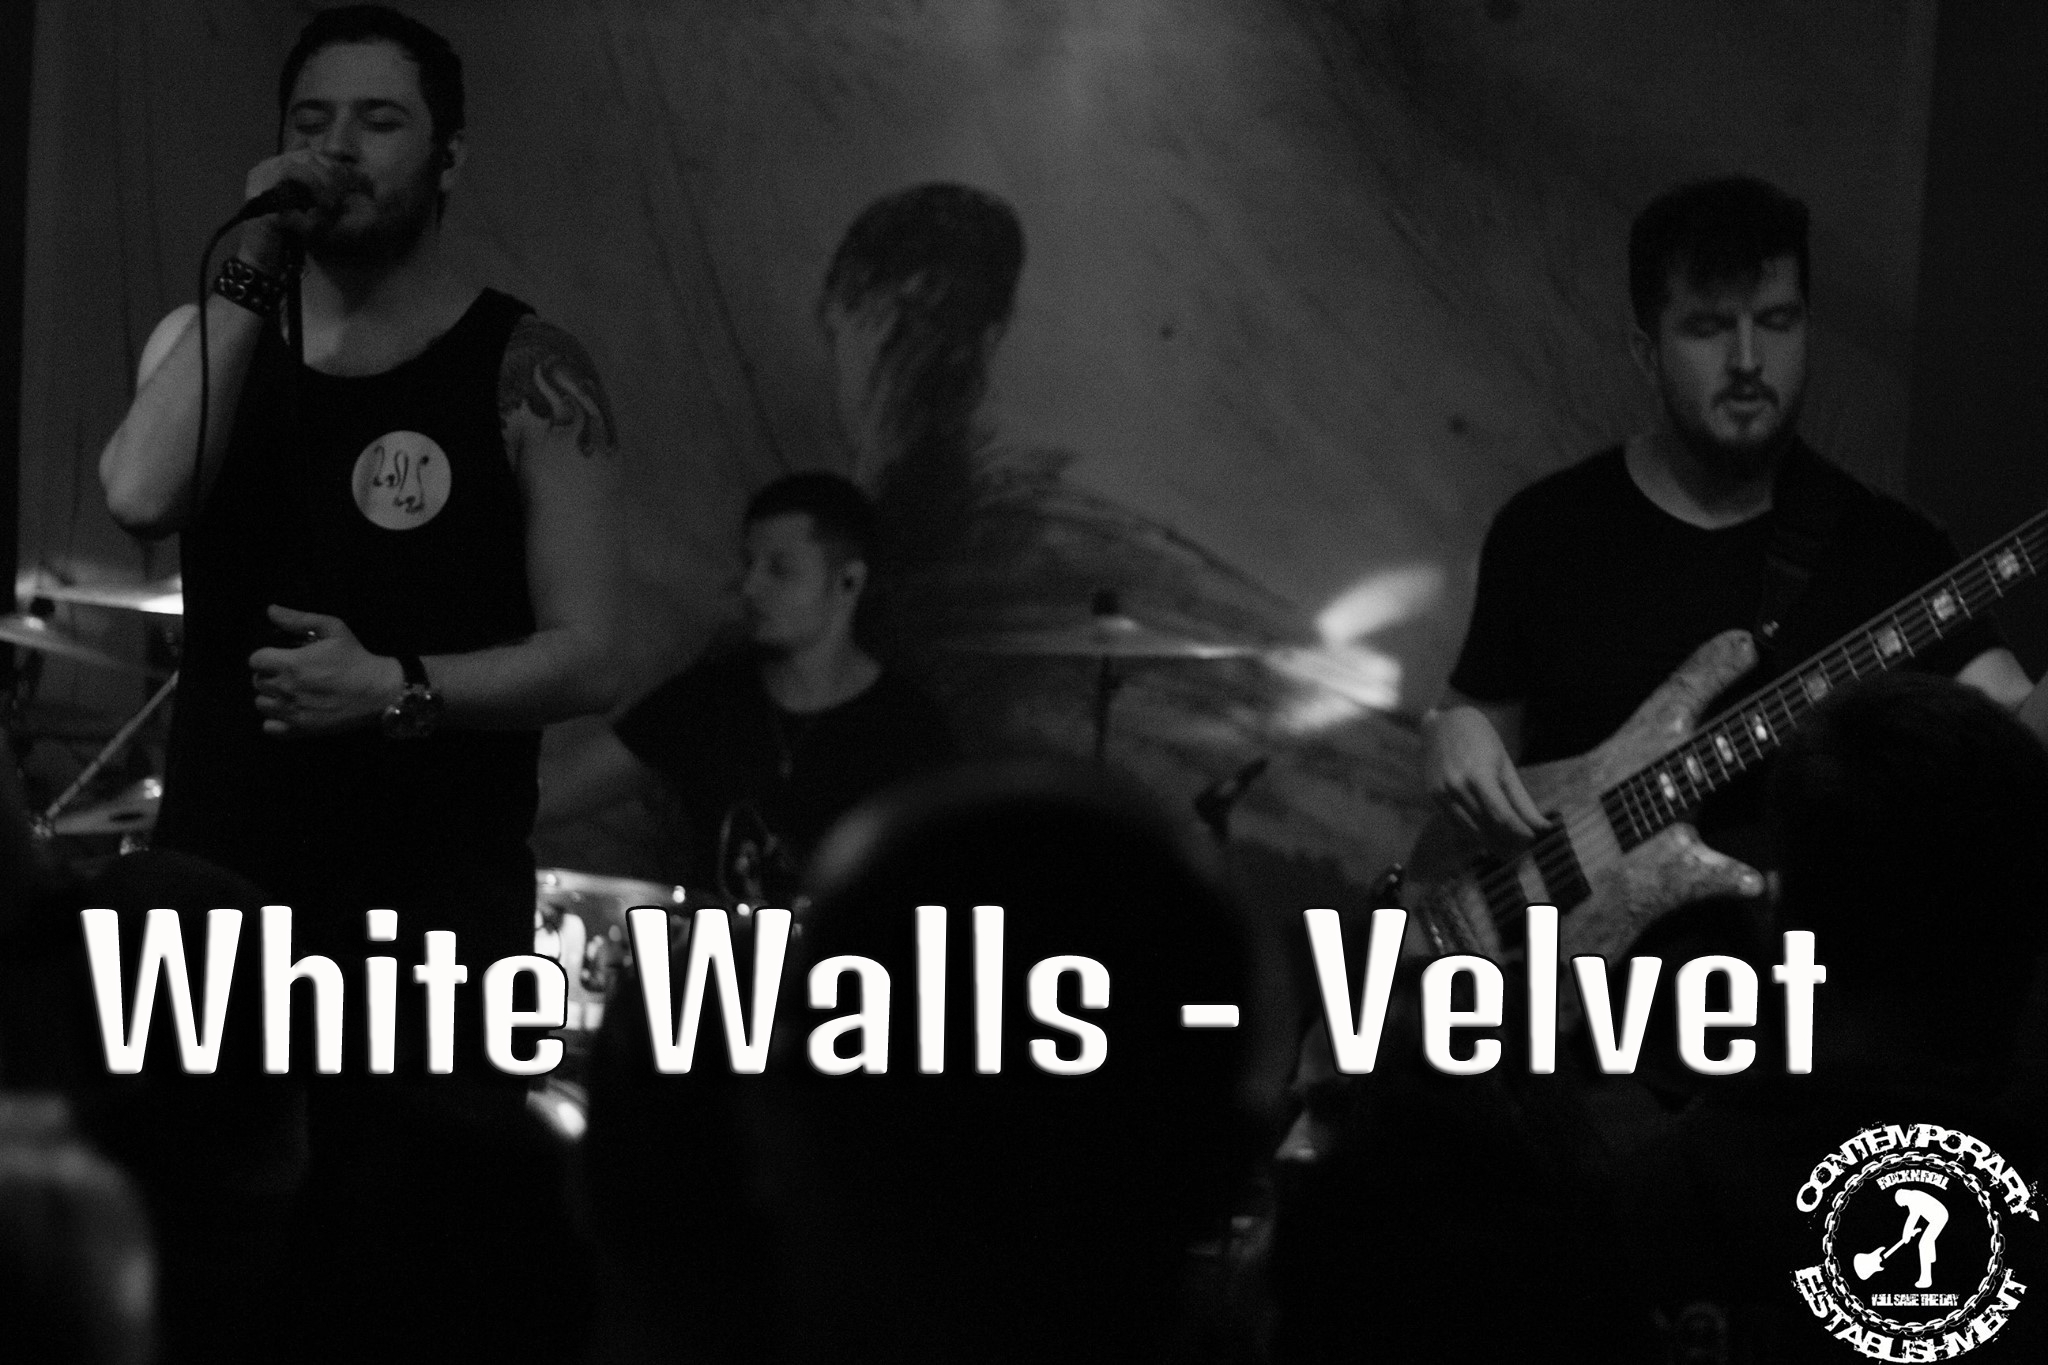 Video: White Walls - Velvet (Live From An Evening With White Walls)